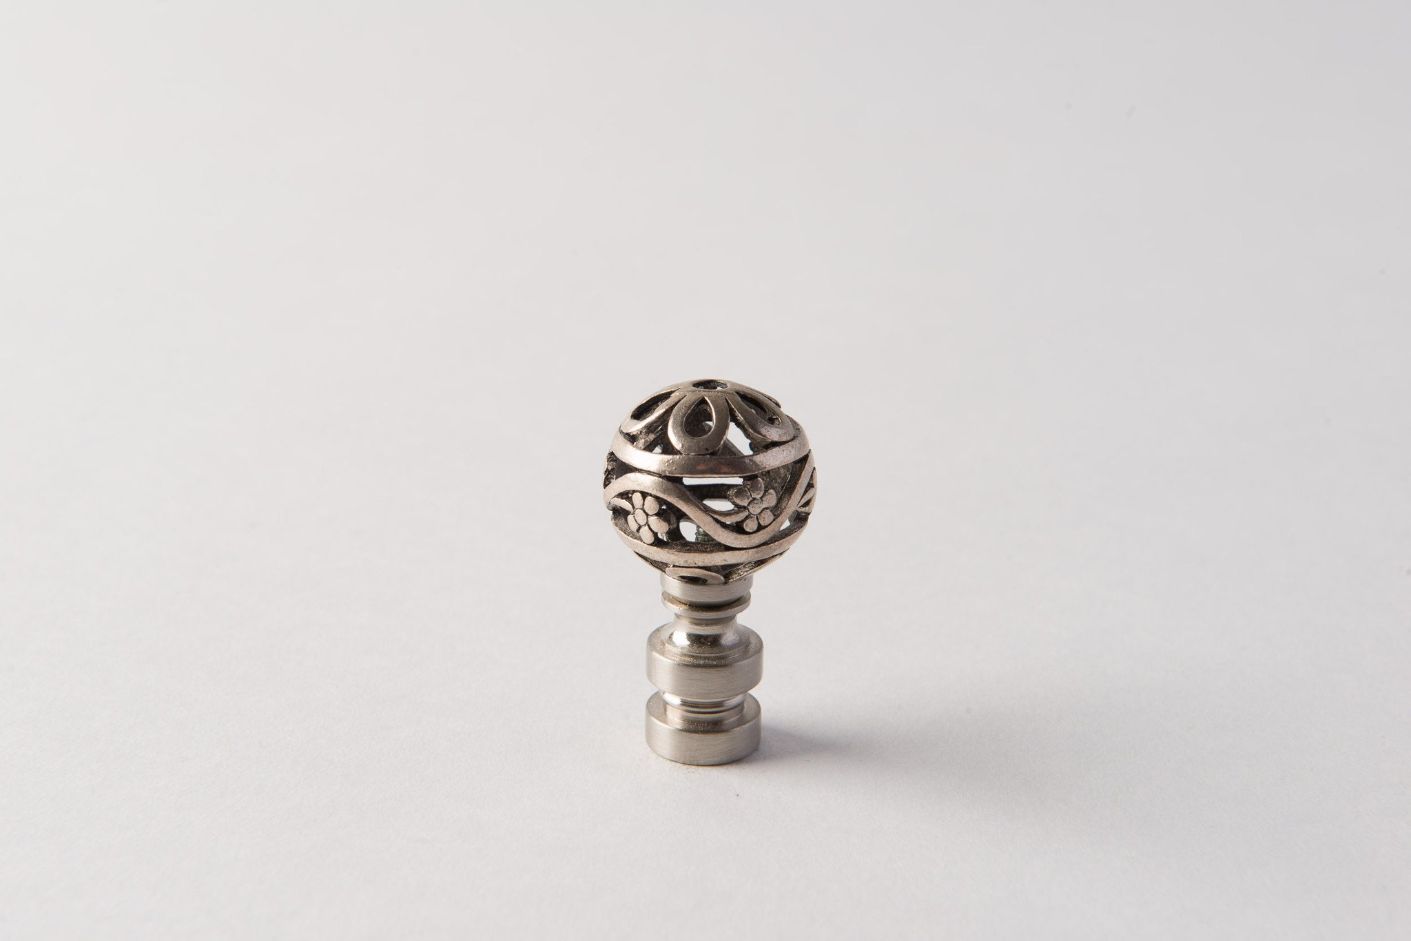 https://www.hotel-lamps.com/resources/assets/images/product_images/Brushed Nickel Pierced Ball.jpg